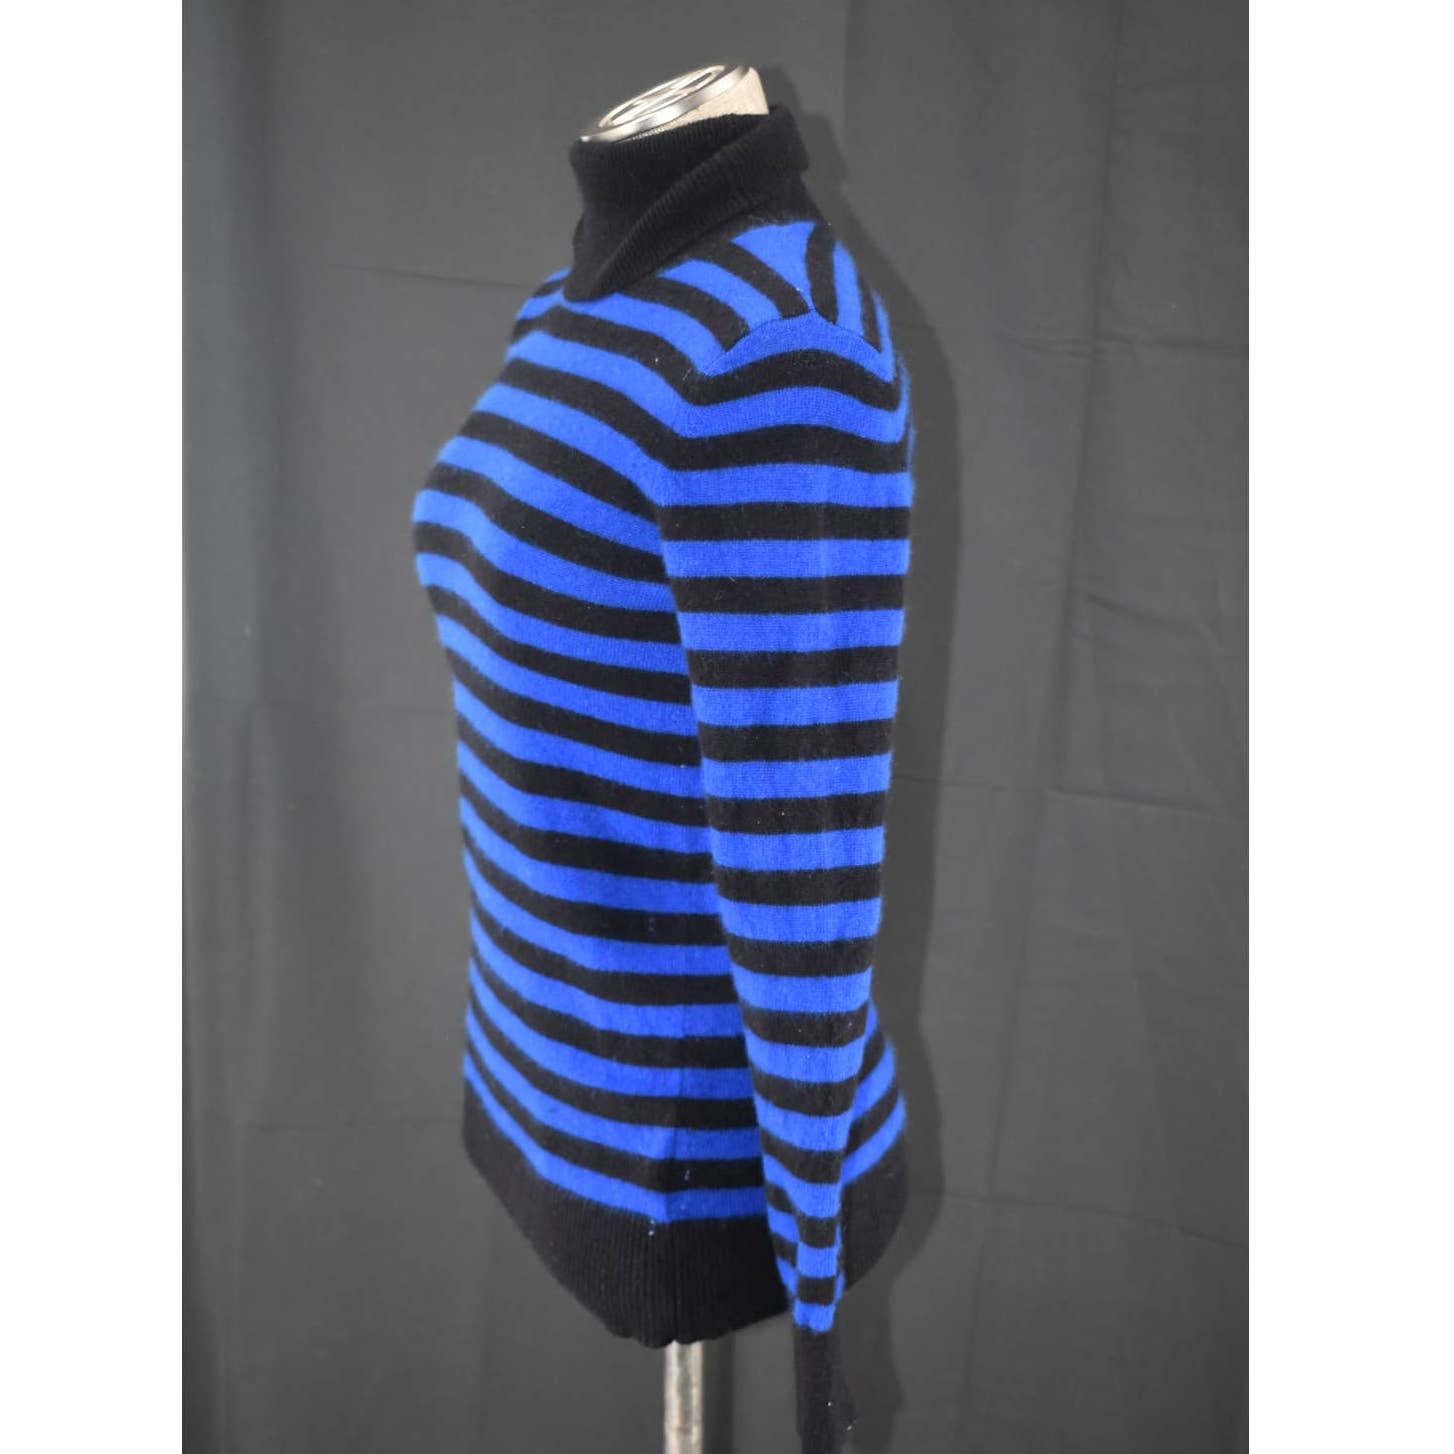 Bloomingdale's Cashmere Black and Blue Striped Turtle Neck Sweater - M